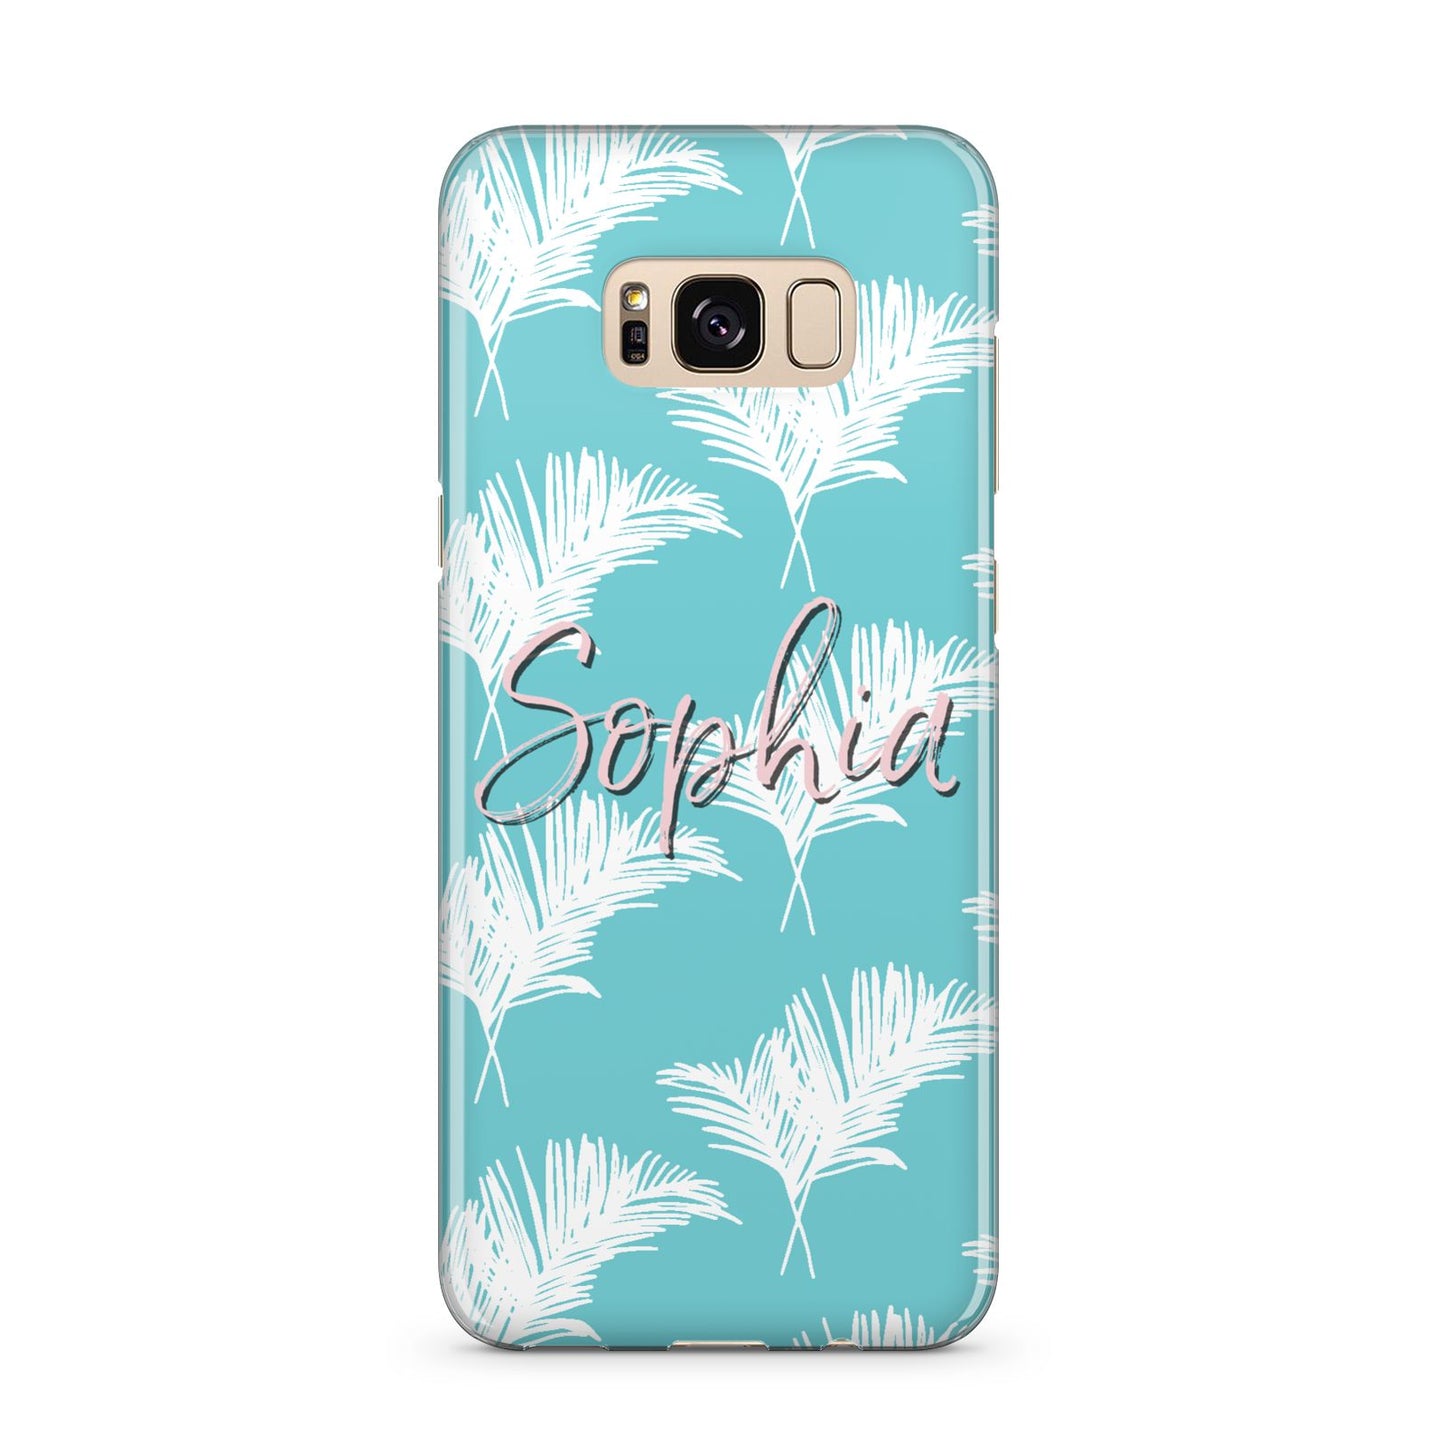 Personalised Blue White Tropical Foliage Samsung Galaxy S8 Plus Case